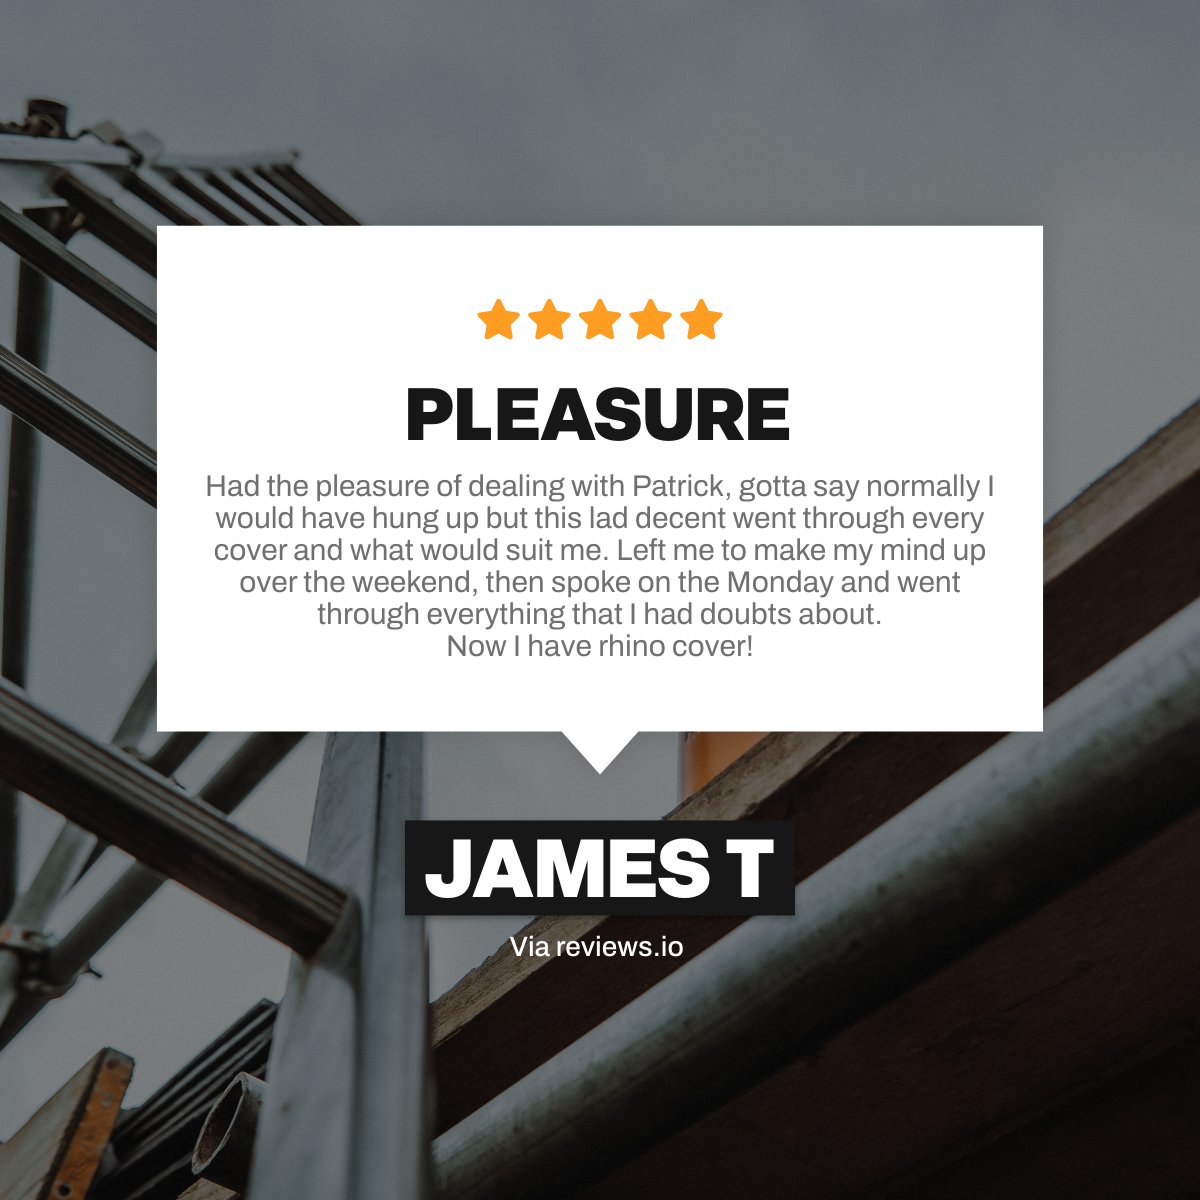 As Jamie says, we are super smooth to deal with 🔥🦏 Get a quote from our five-star team that's bespoke to your trade business: 0116 243 7904 / rhinotradeinsurance.com/quote/ #tradespeople #reviews #fivestar